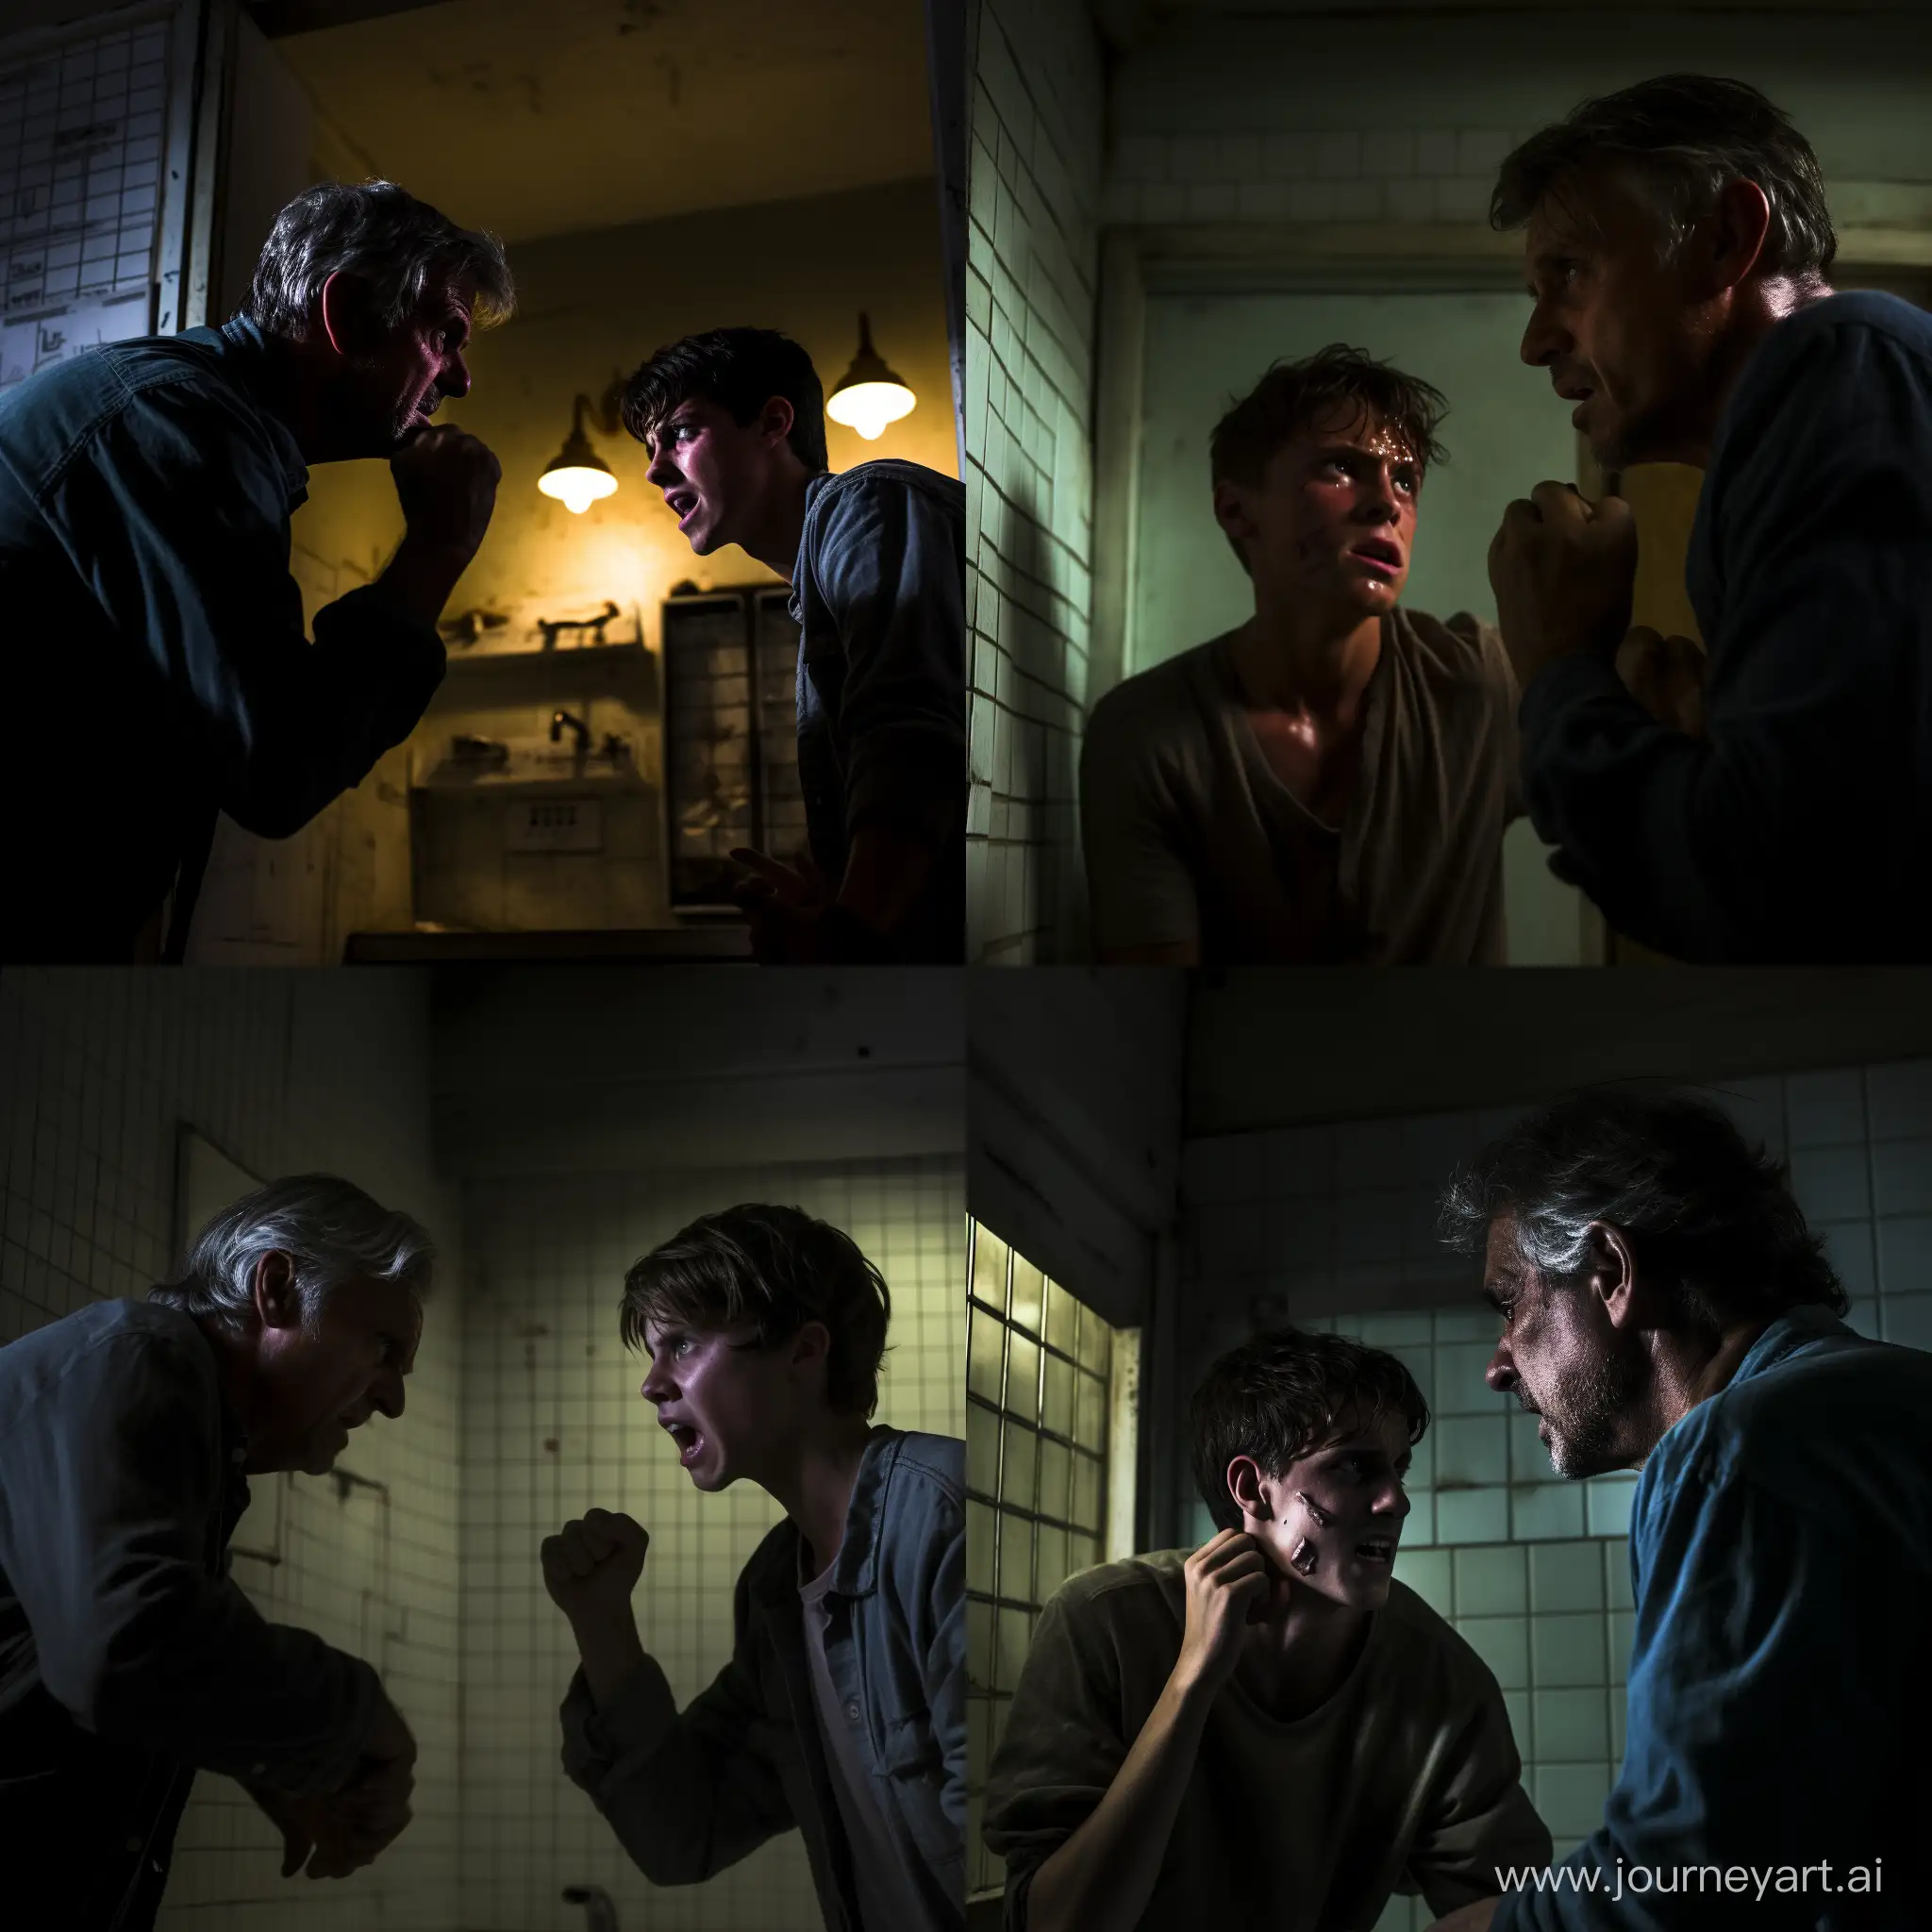 In a dimly lit bathroom, a father looms over his teenager son , forcefully pressing him against a wall. The father raised fist and threatening to hit the son. Frame the scene from a side view, slightly behind the confrontation, Use lighting and composition to heighten the drama and tension in the atmosphere. there is 2 of them - a father and son 